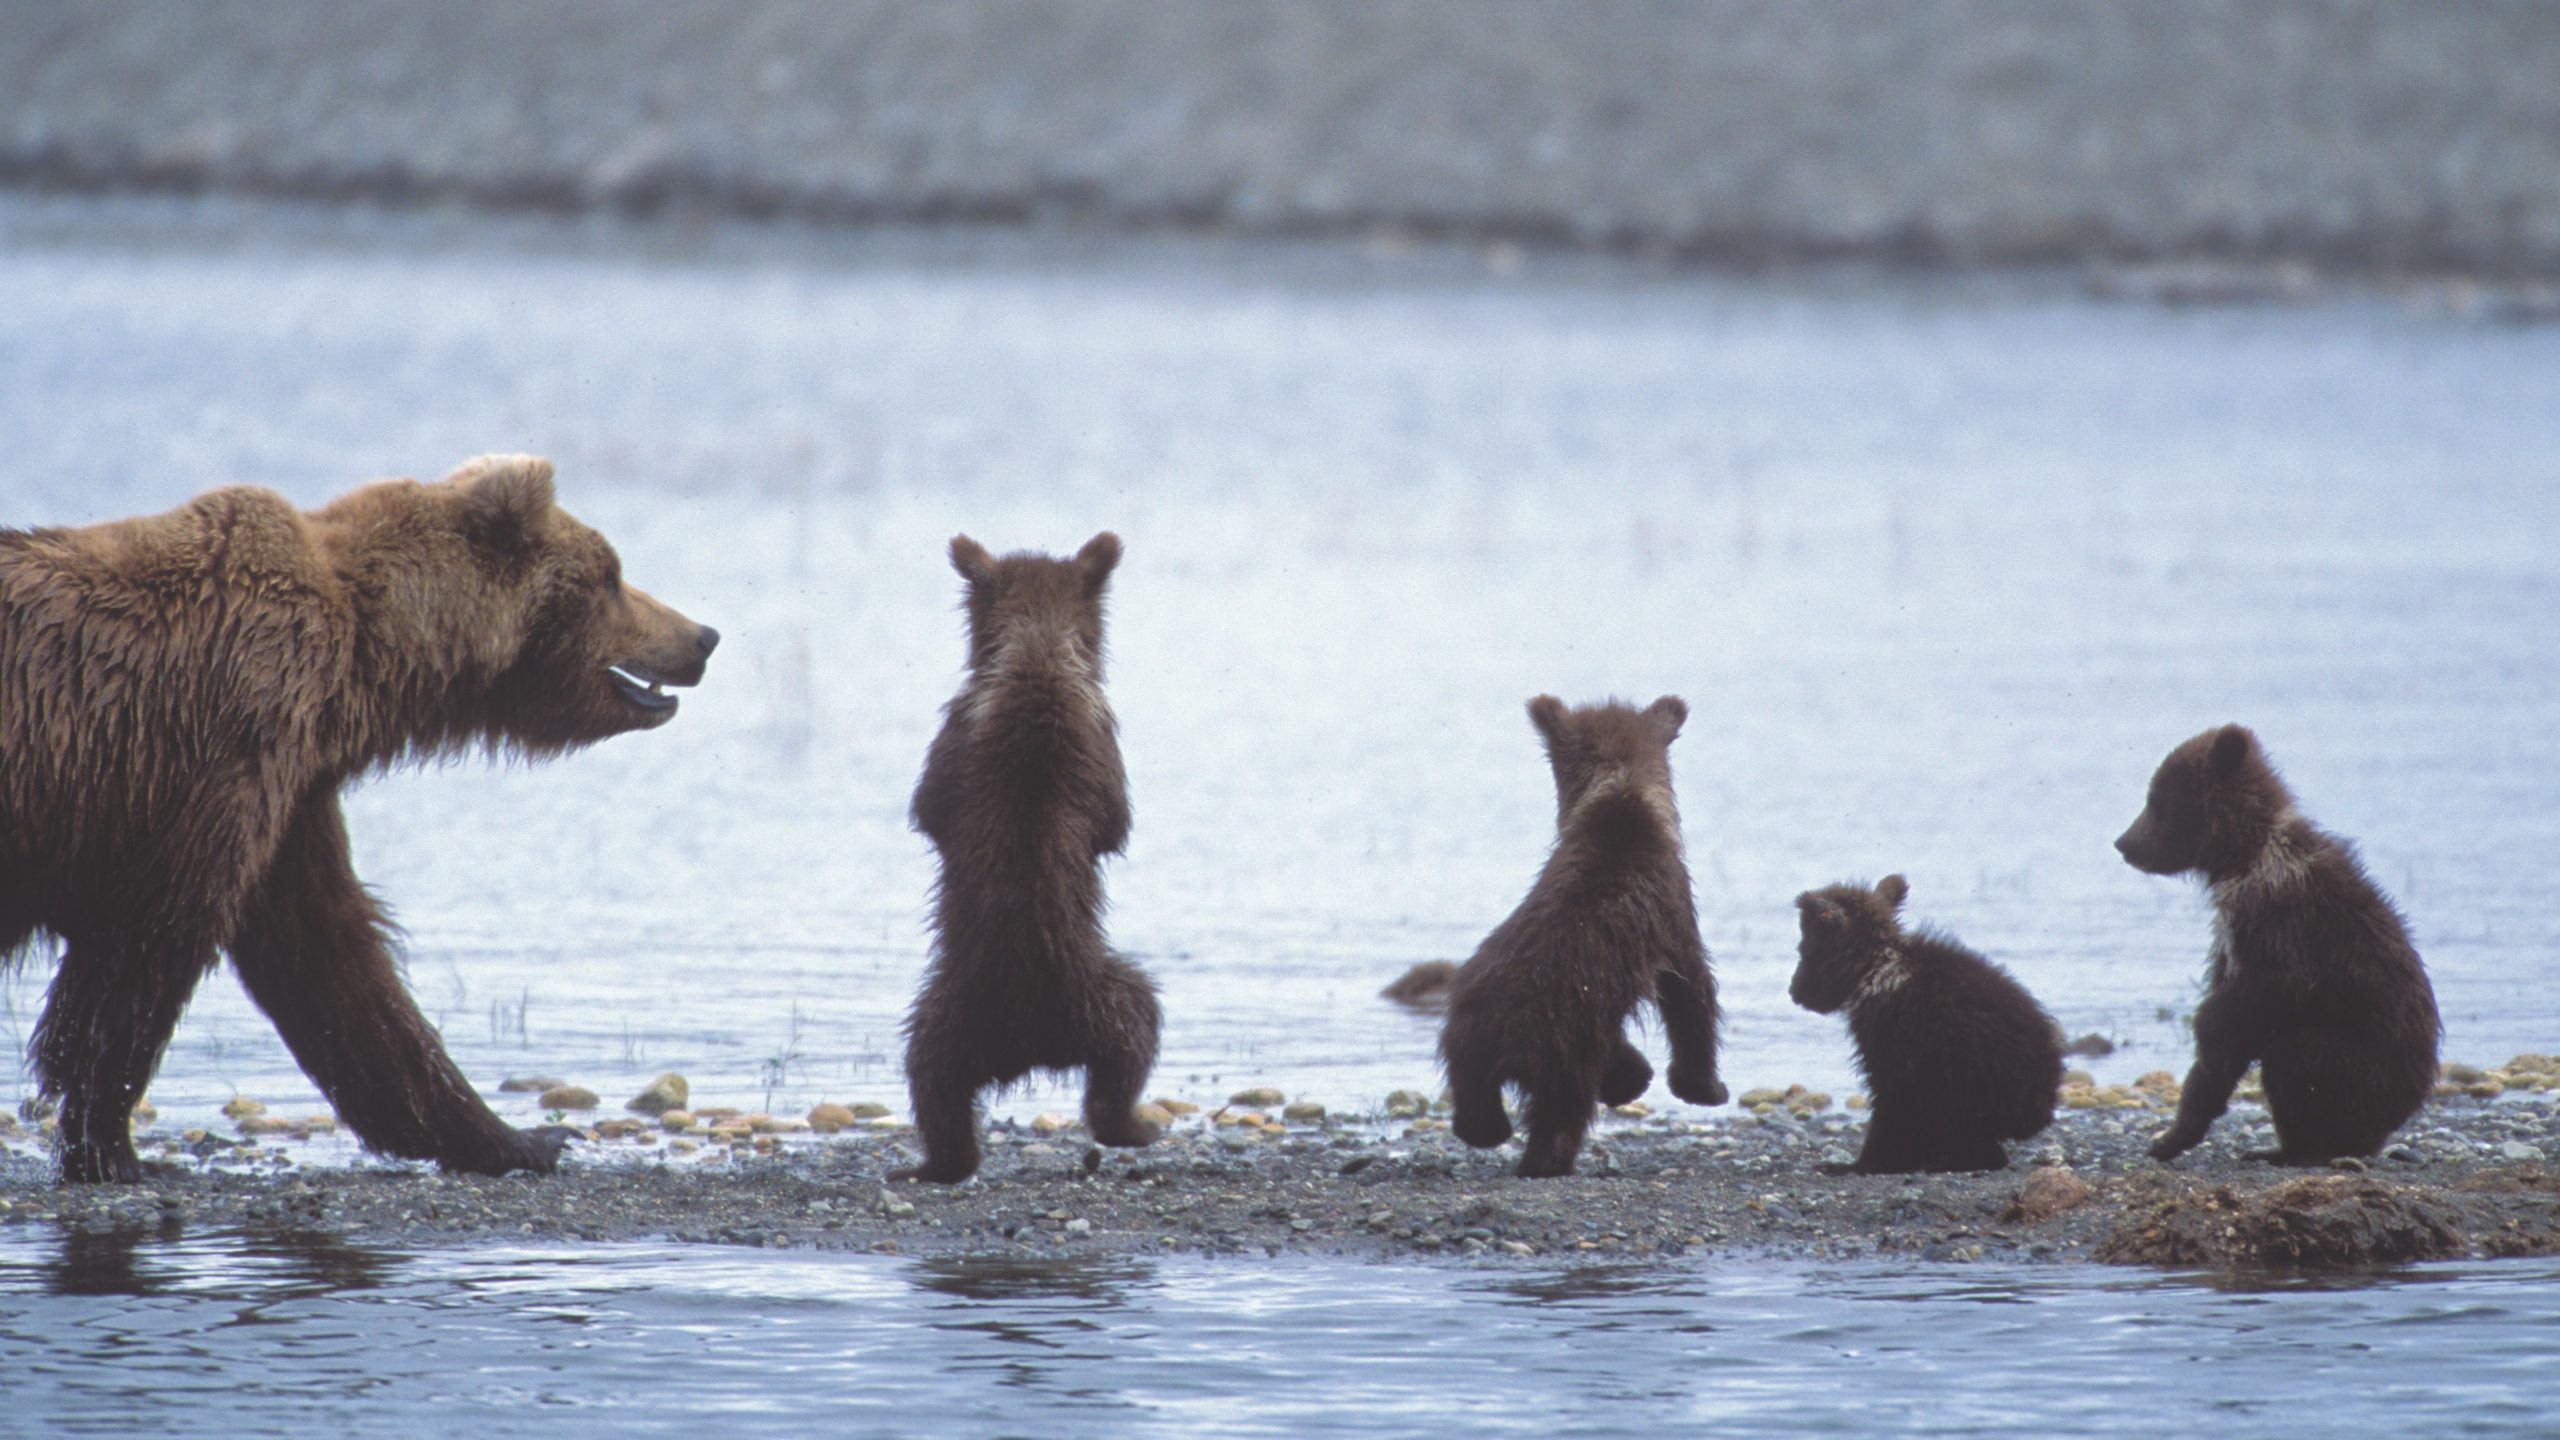 These Wild Baby Animals Photos Offer a Rare and Intimate Glimpse Into Nature